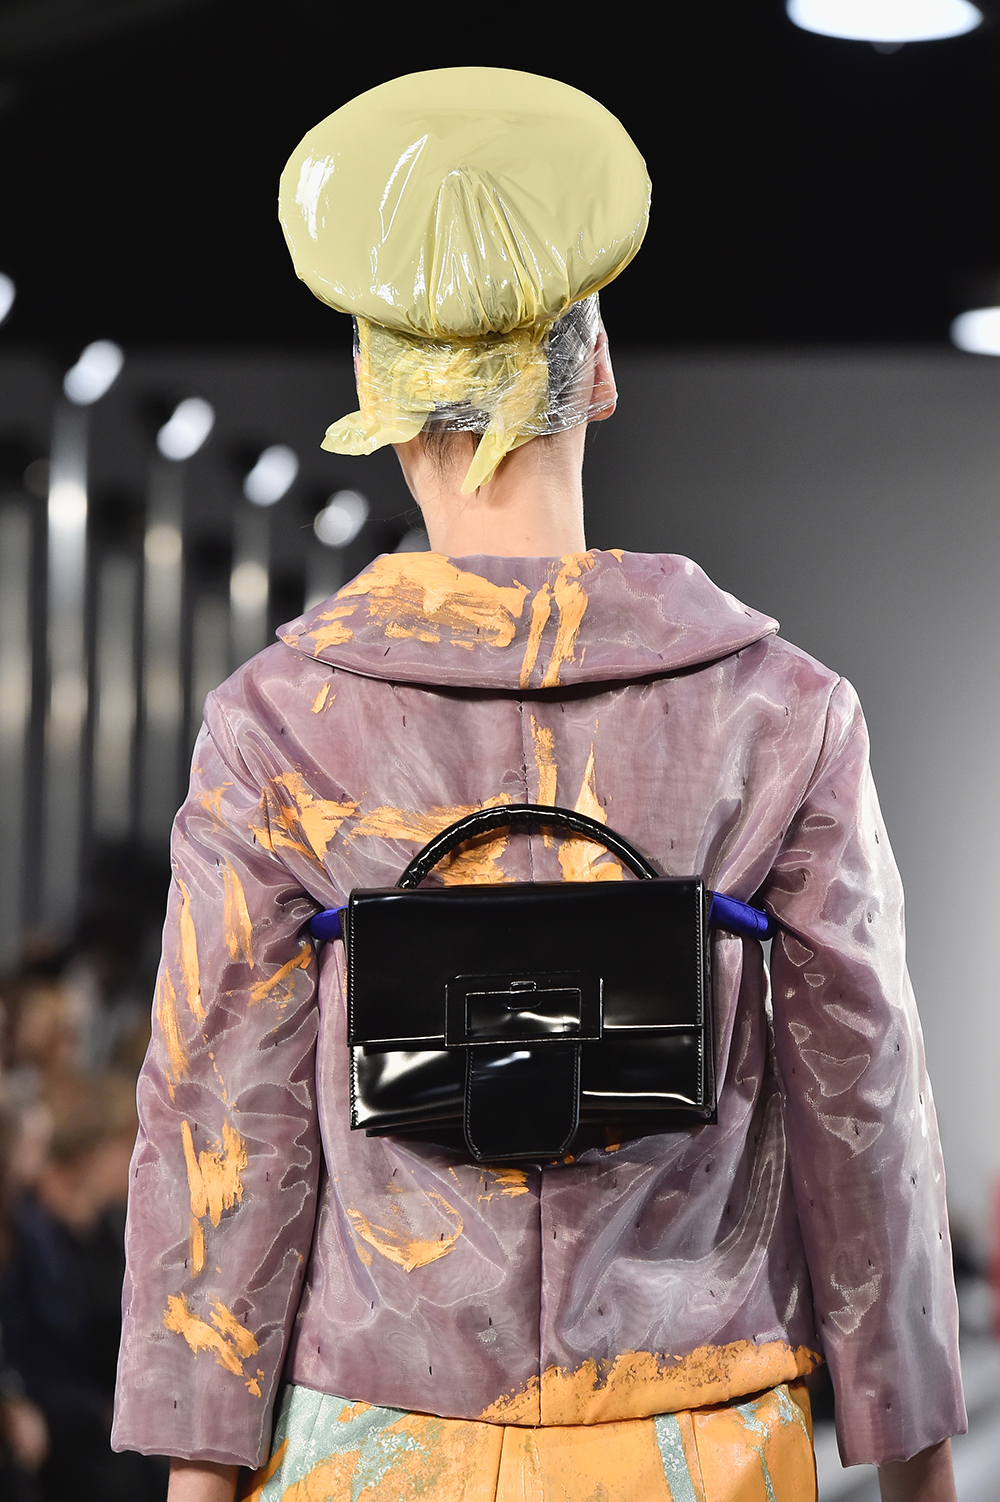 Handbags were also tied and knotted around the rib cage at Margiela. Photo / Getty Images